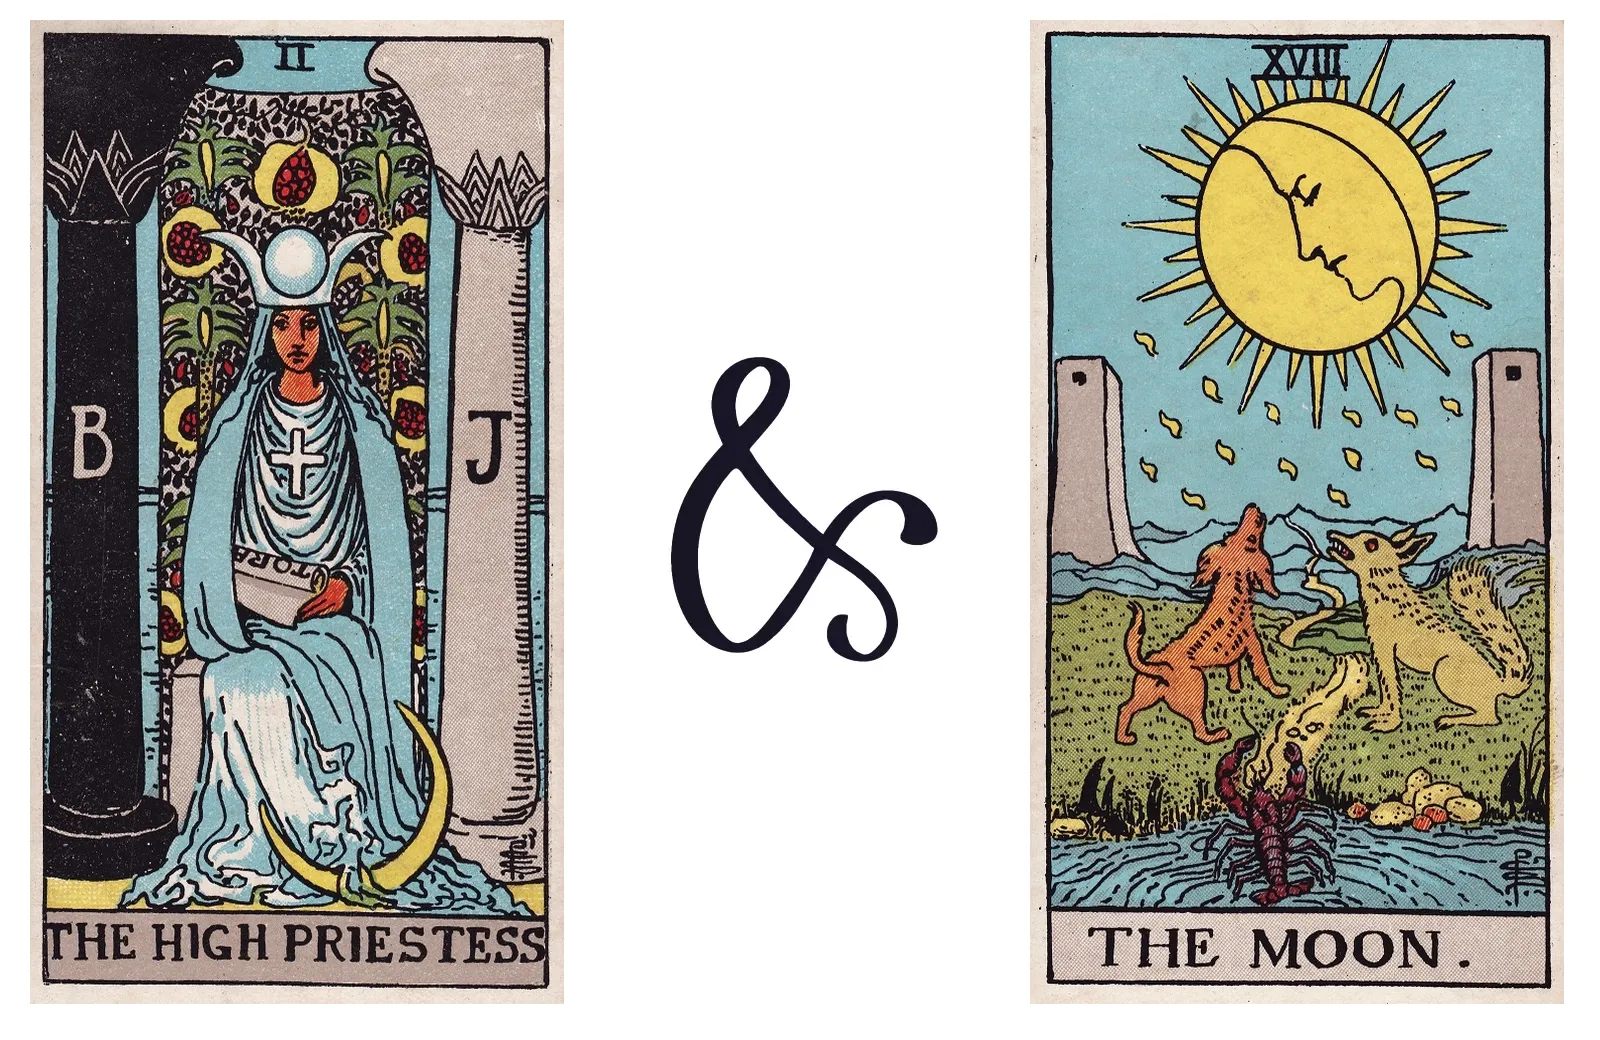 The High Priestess and The Moon